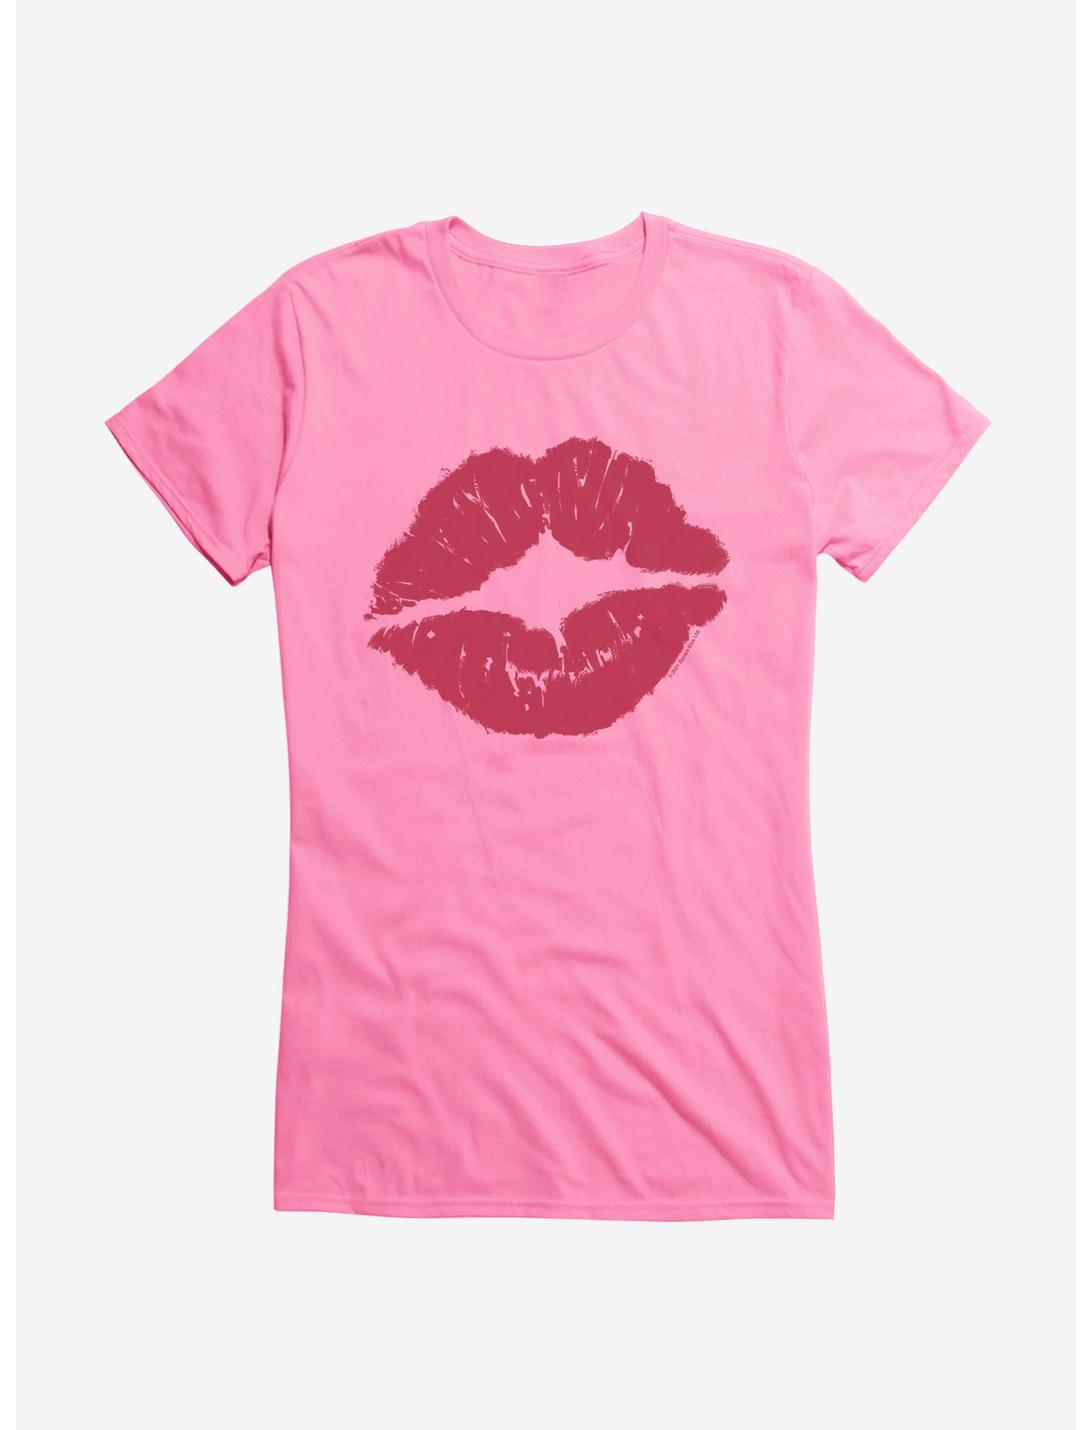 Square Enix Red Lips Girls T-Shirt, CHARITY PINK, hi-res